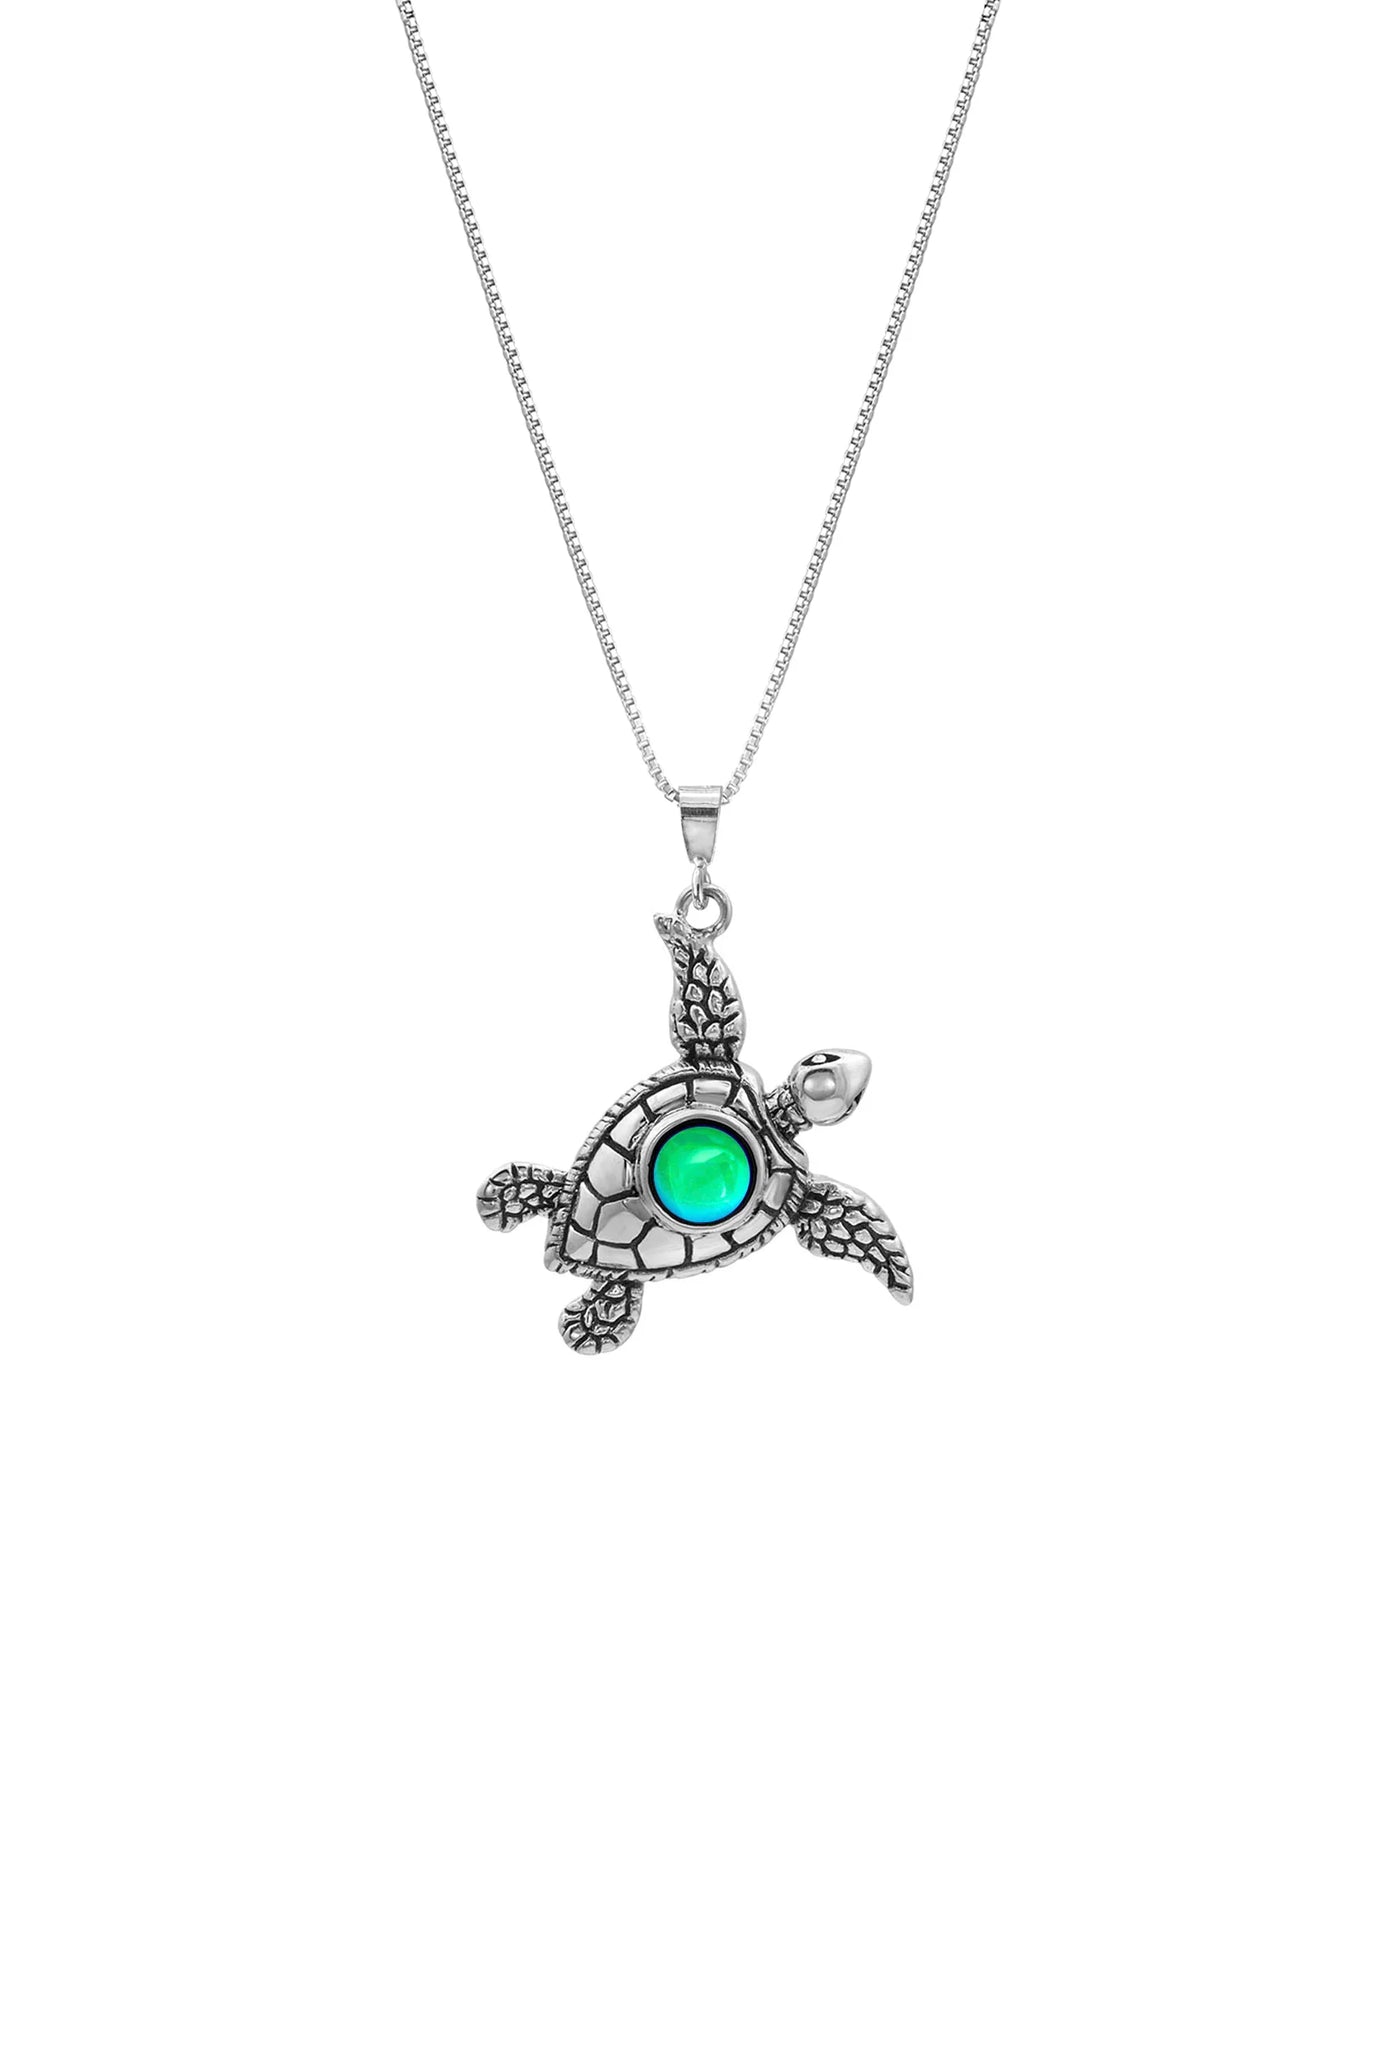 Small sea turtle necklace, sterling silver with green crystal 